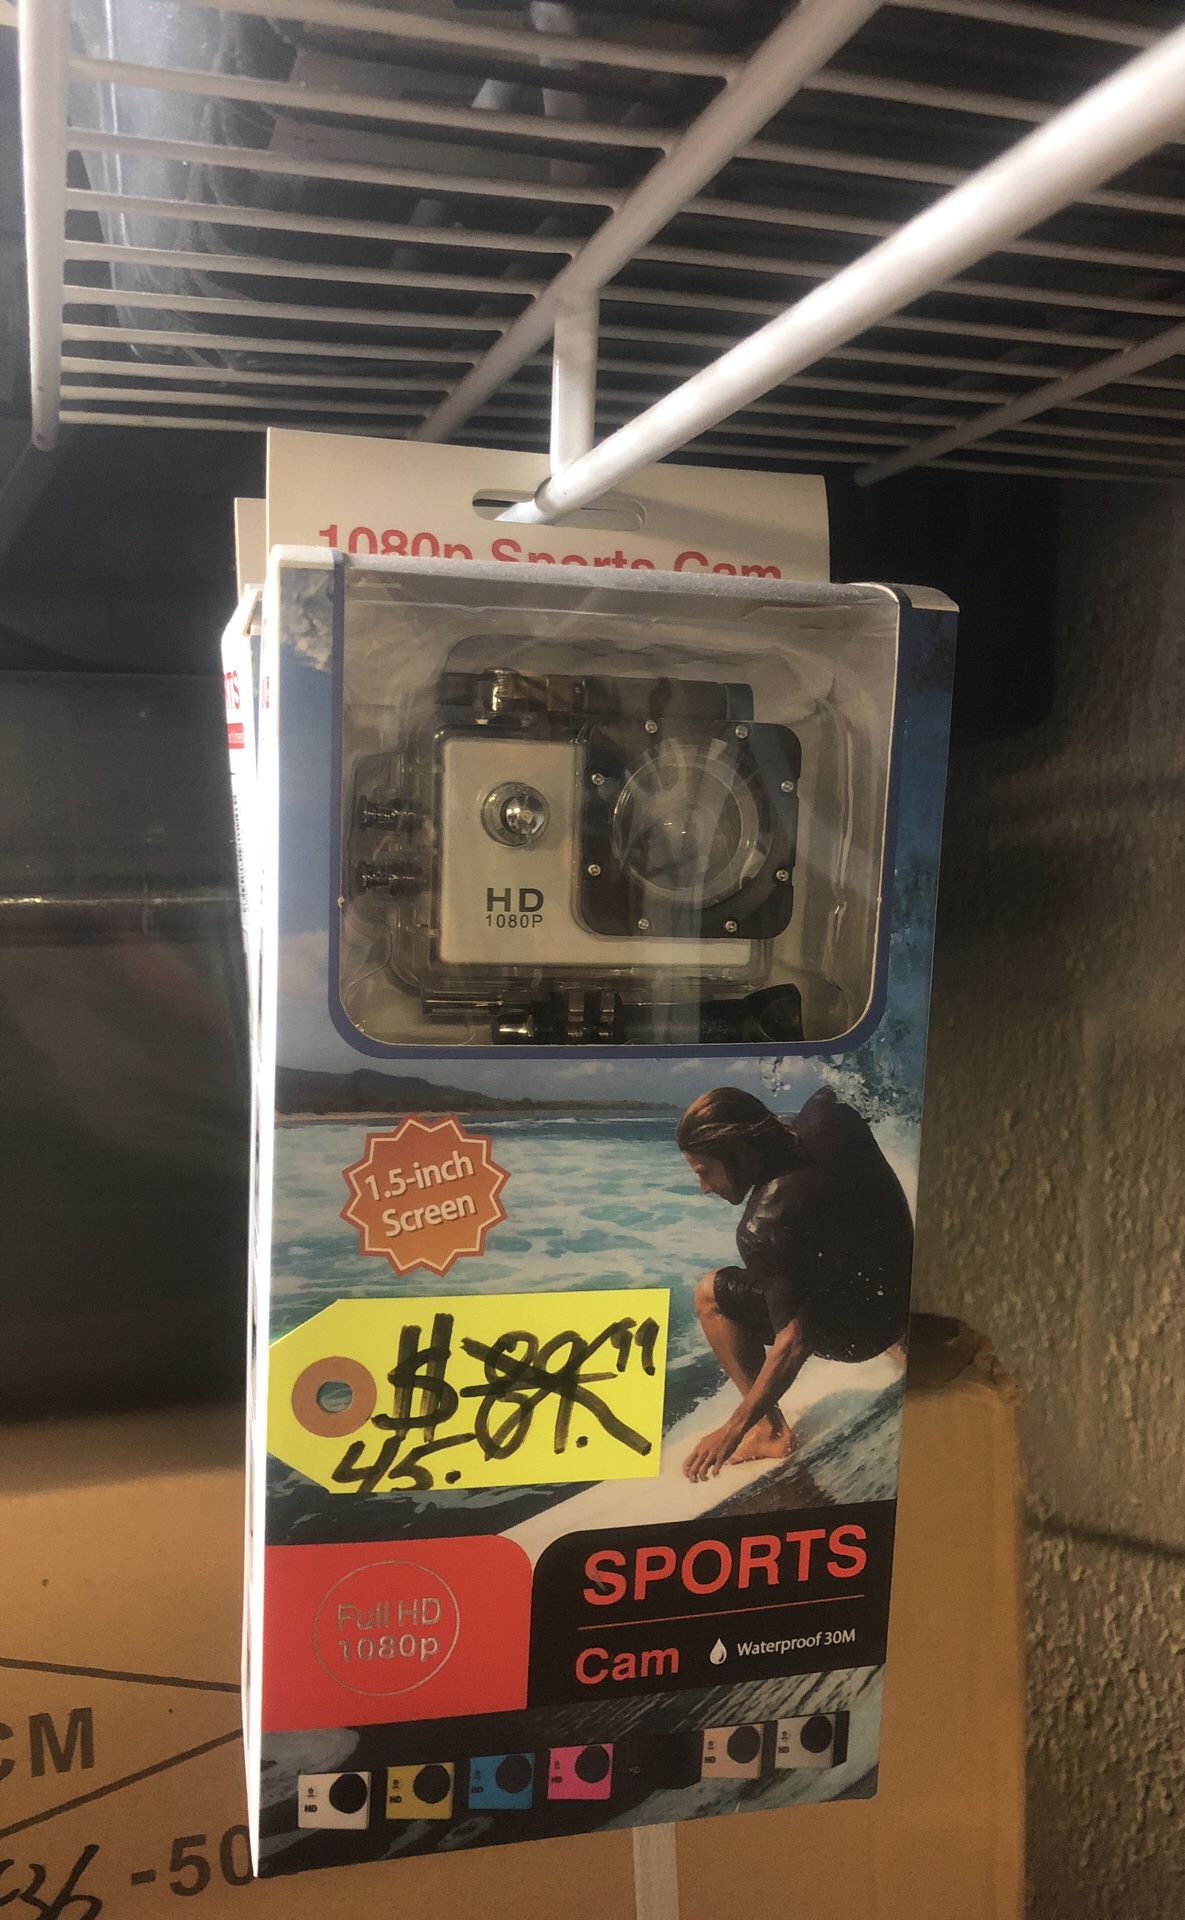 Go-pro Style Action Cam only $39.99 Sale!